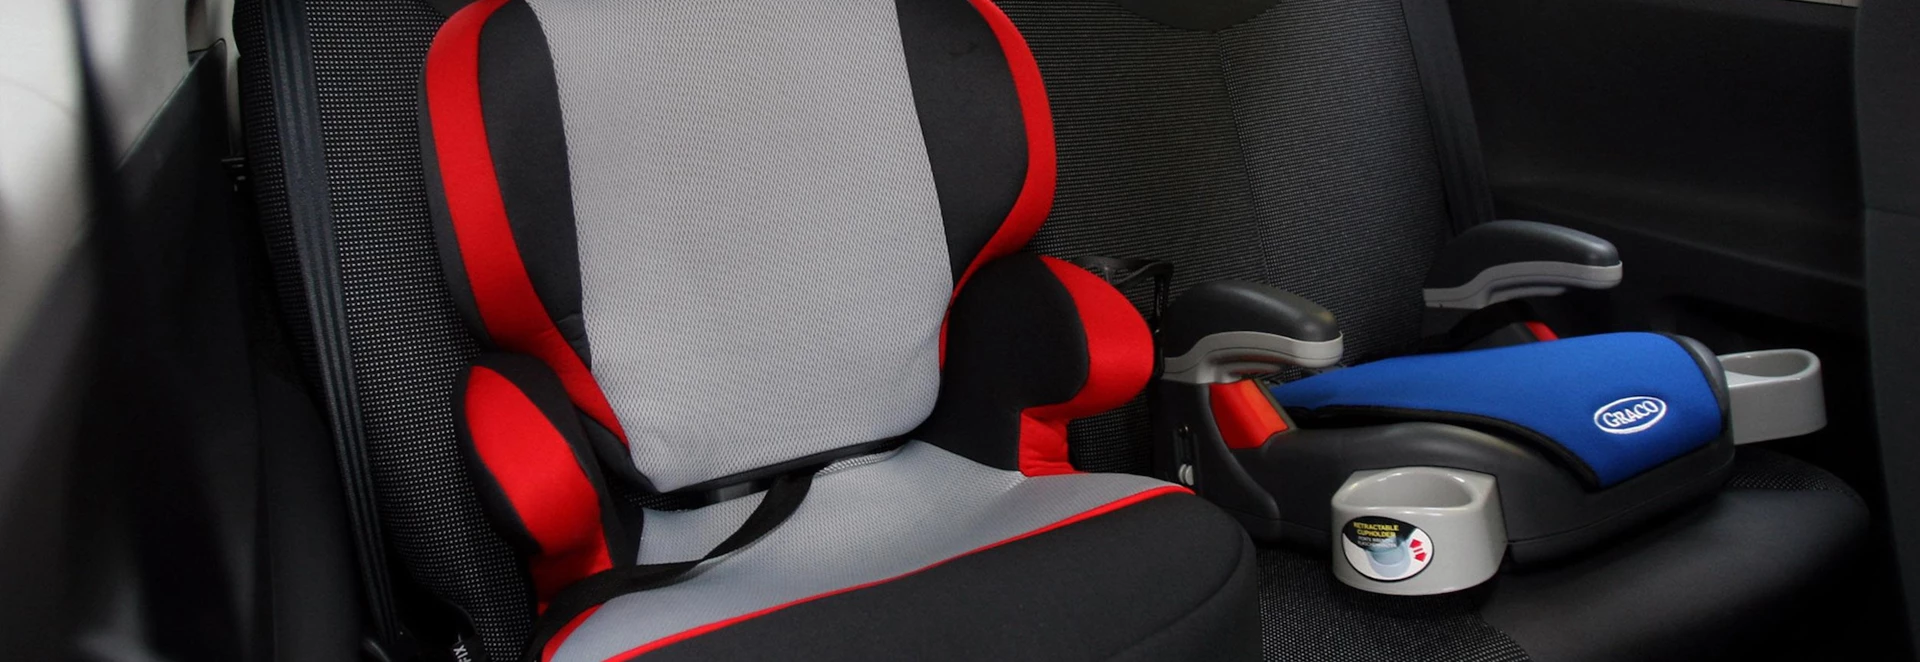 New Child car seat laws introduced in March 